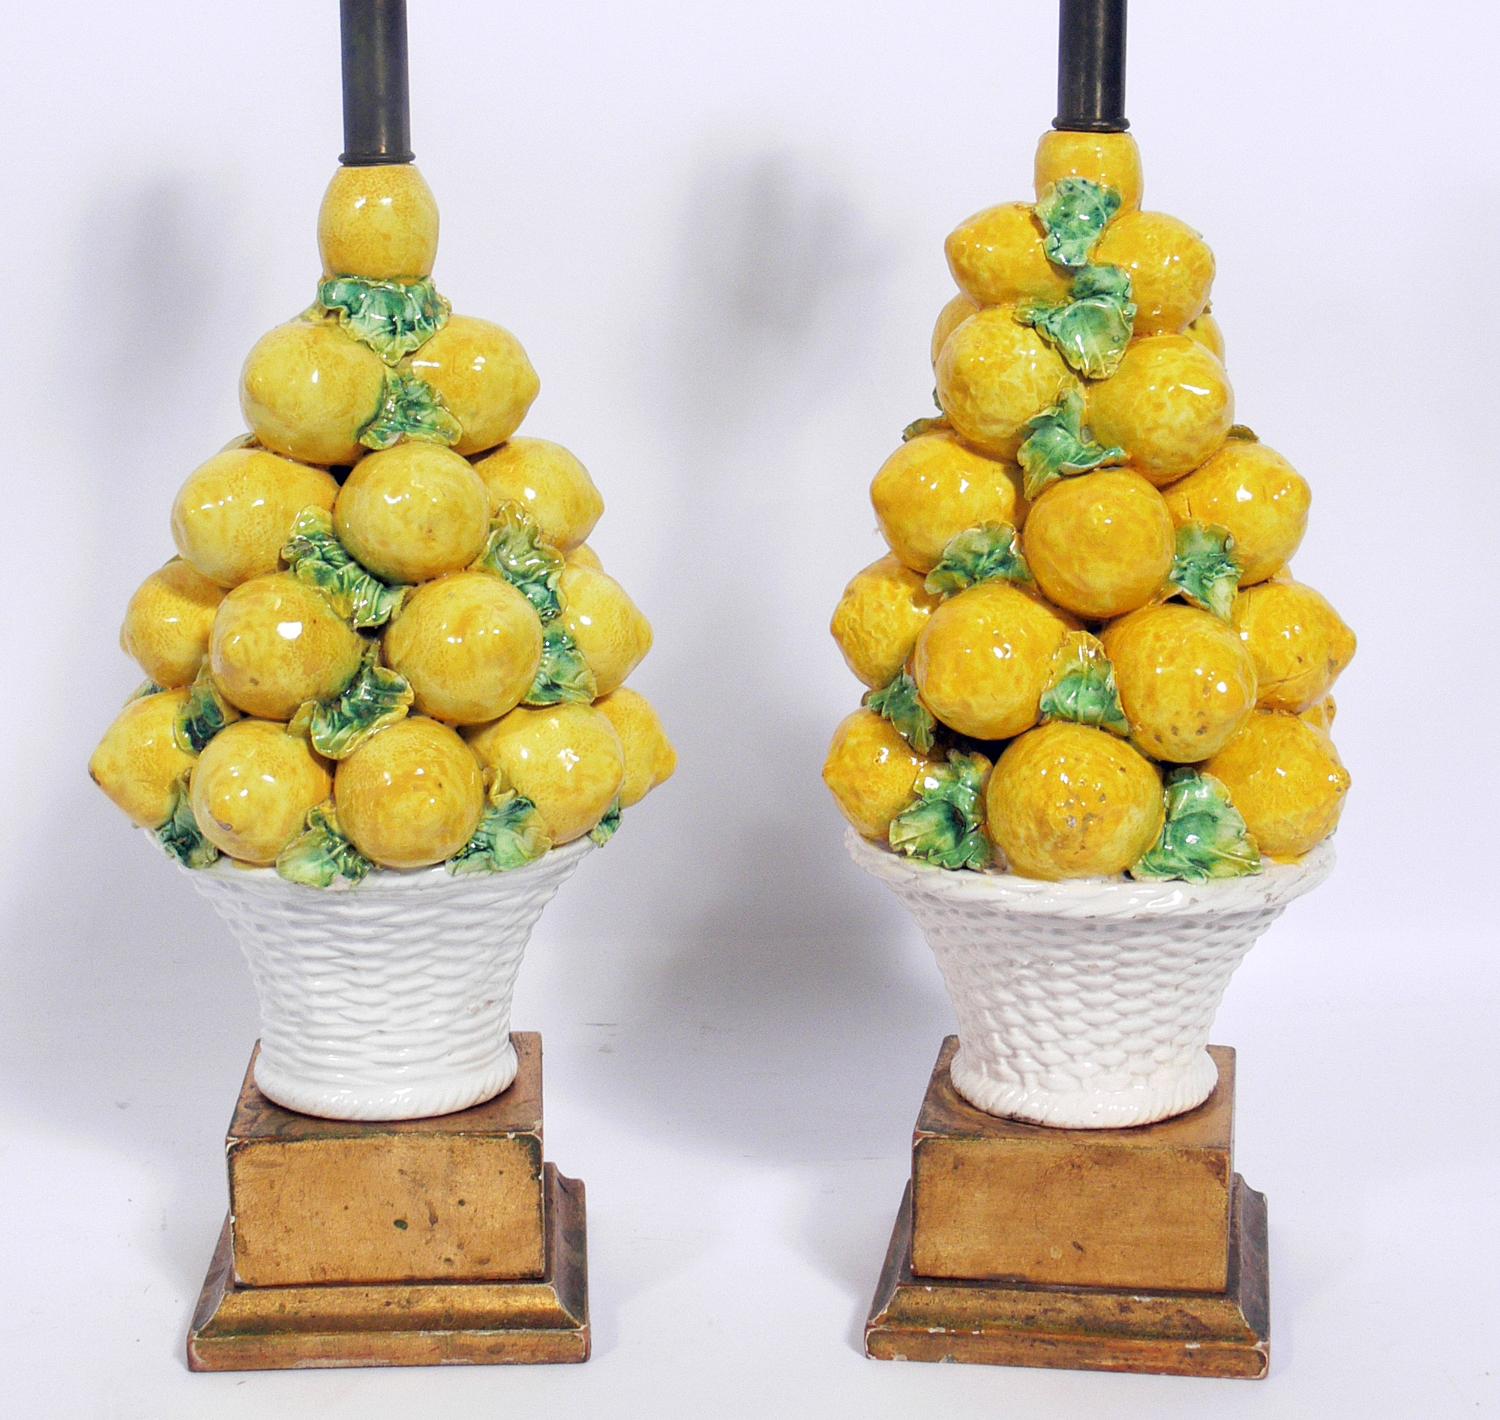 Pair of Italian ceramic lemon lamps, Italy, circa 1950s. They have been rewired and are ready to use. The price noted below includes the shades.